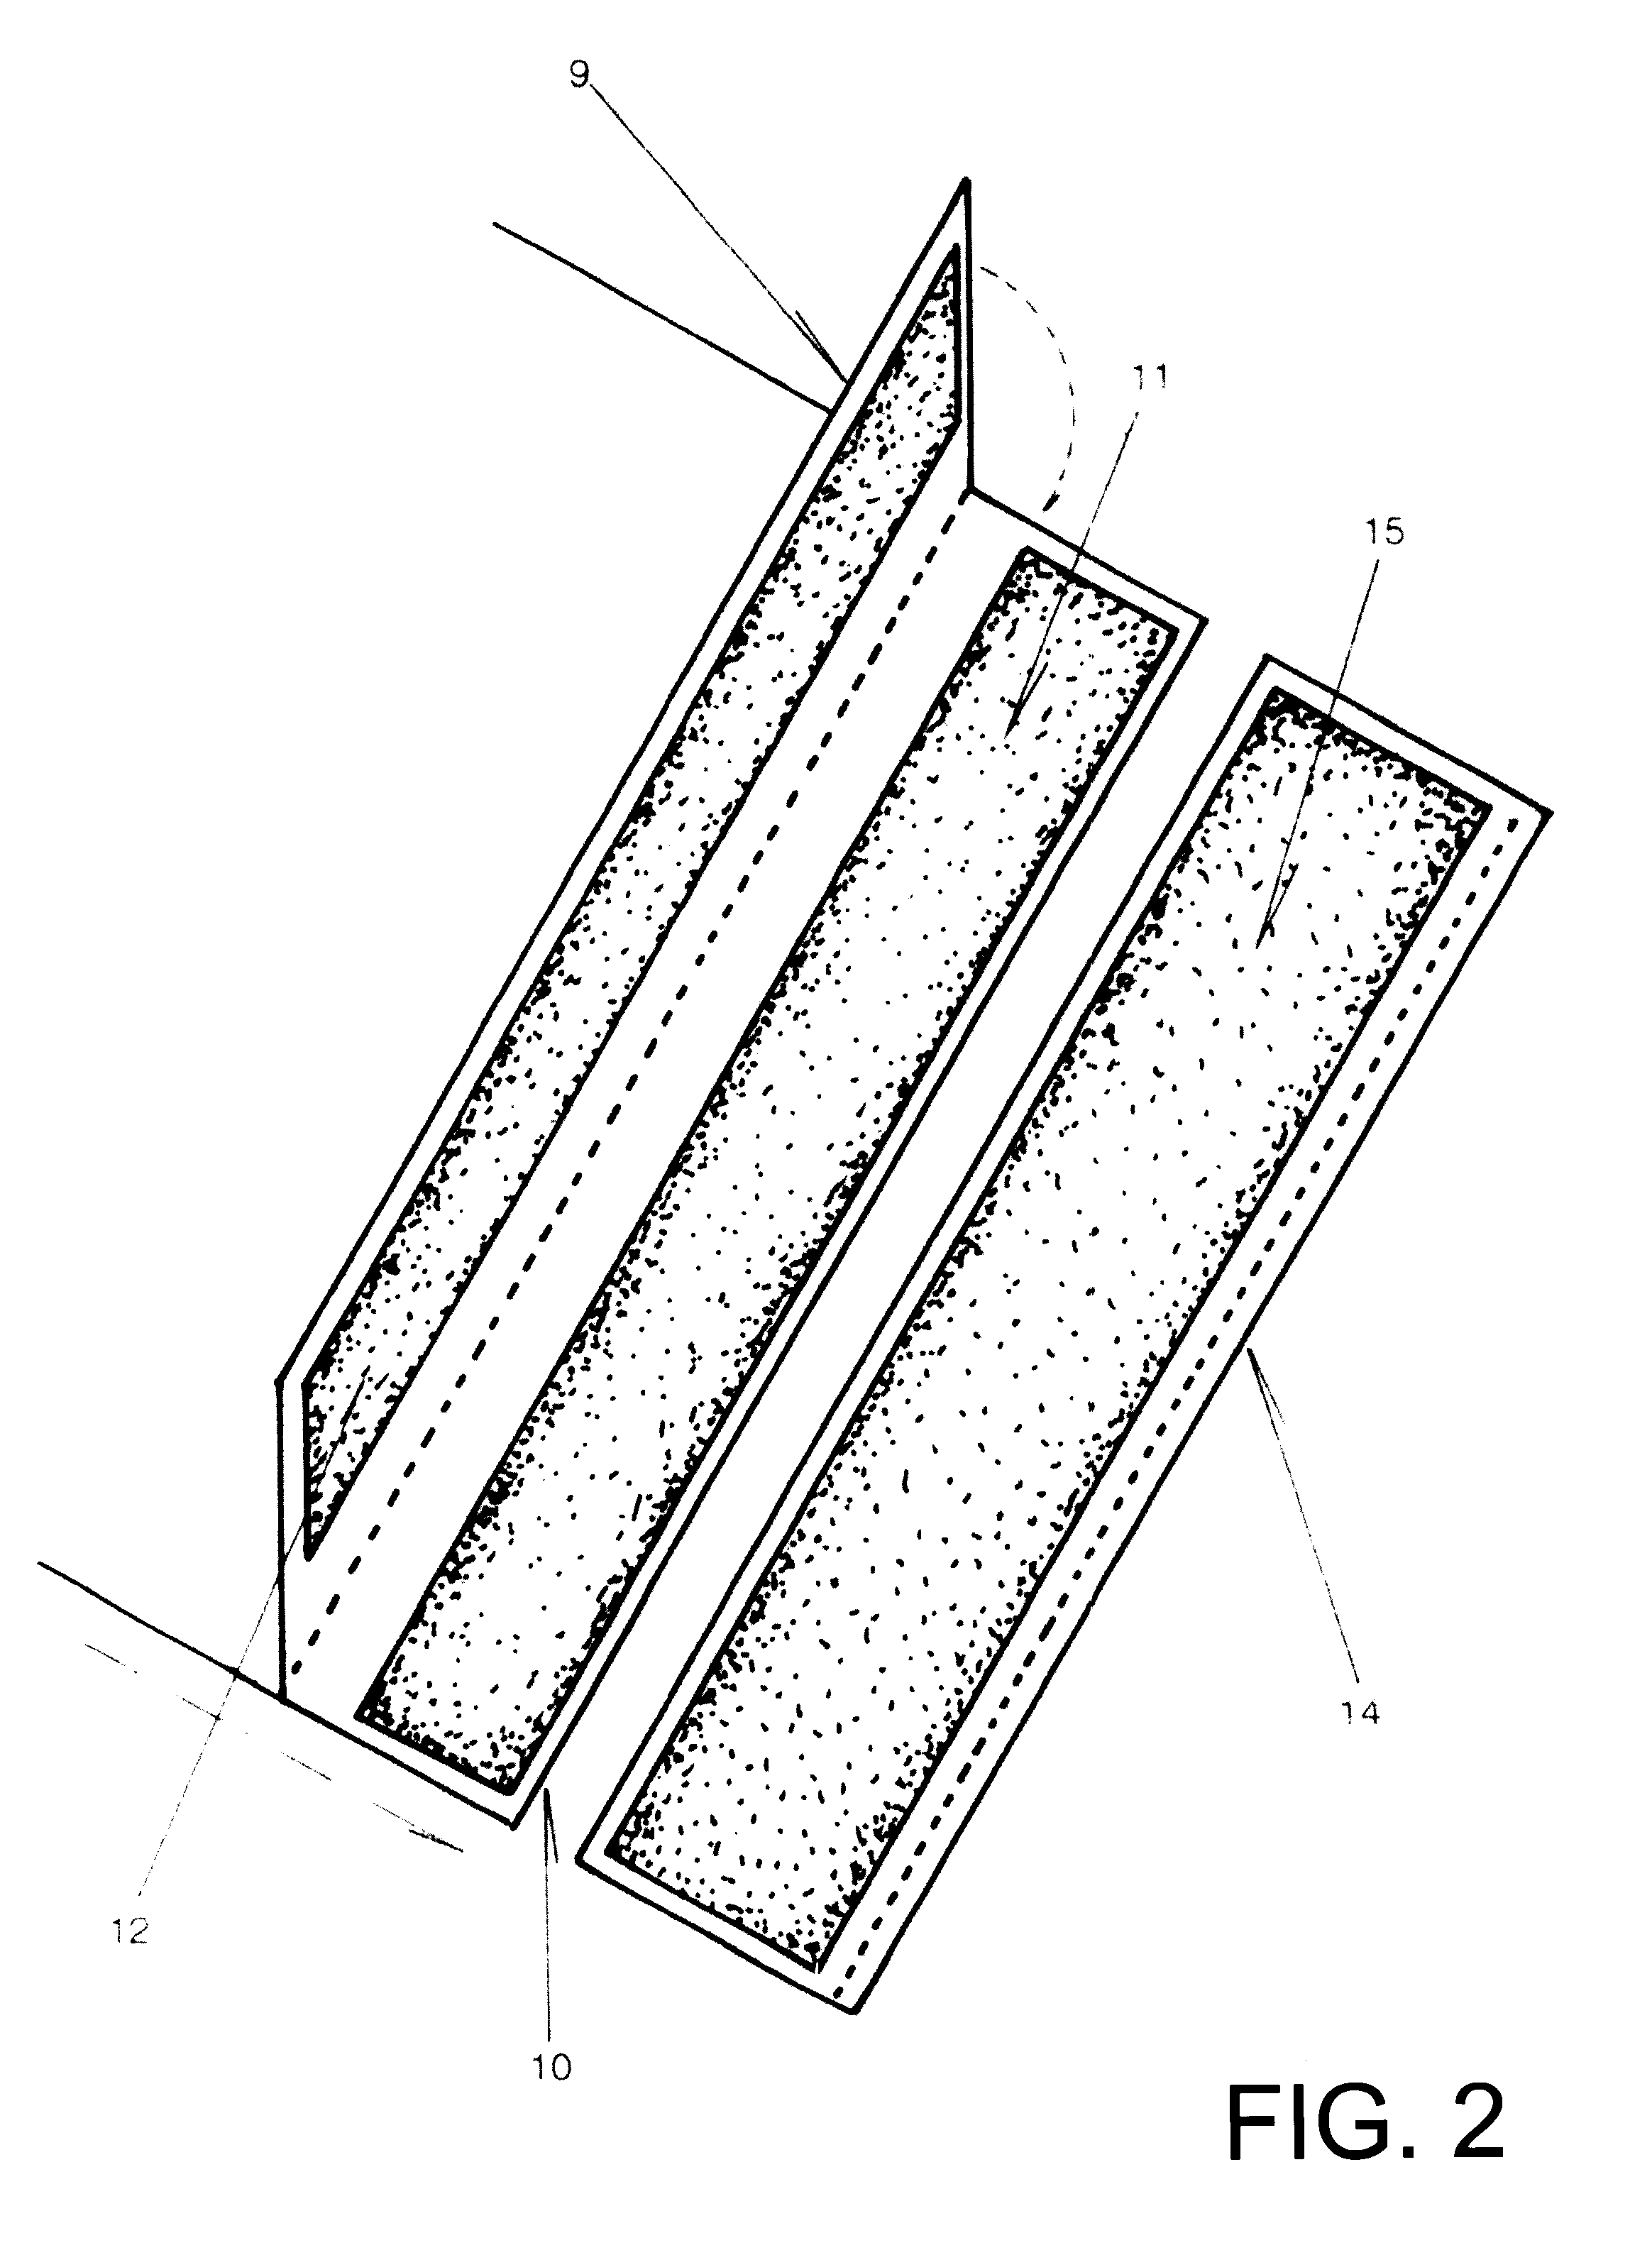 Dismountable and adjustable fastening device for laying down pediatric patients in an inclined position